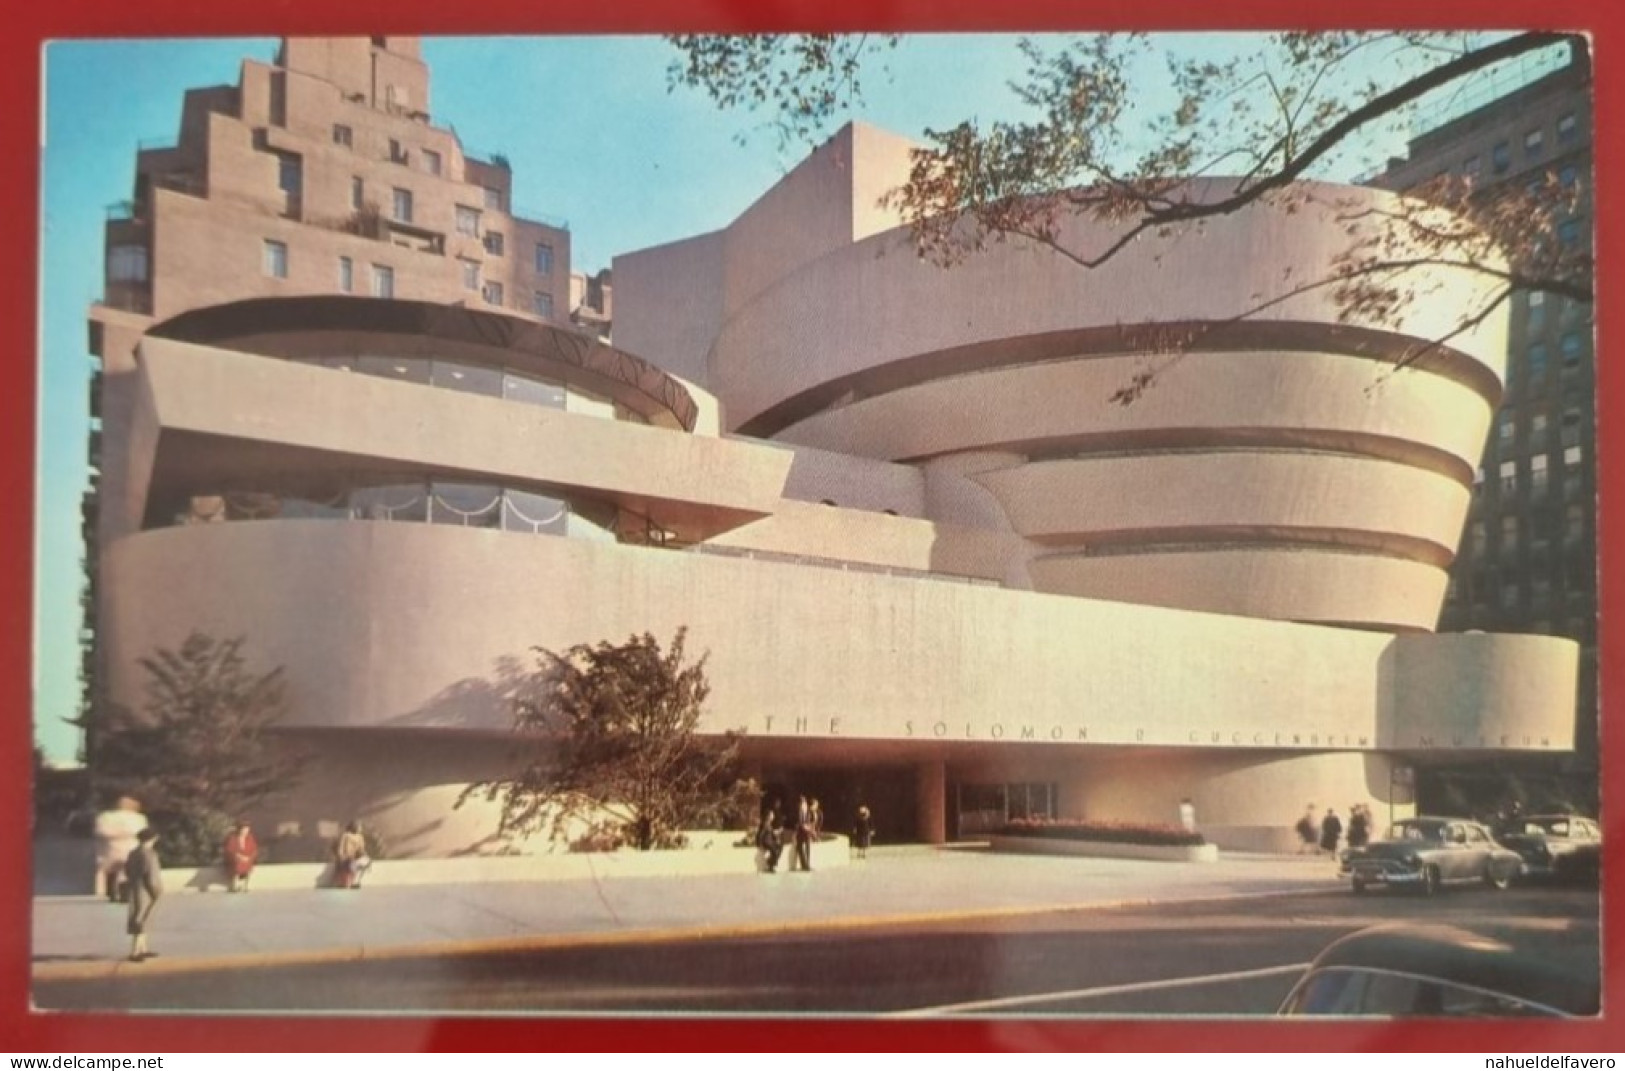 Uncirculated Postcard - USA - NY, NEW YORK CITY - THE SOLOMAN R. GUGGENHEIM MUSEUM - Museen